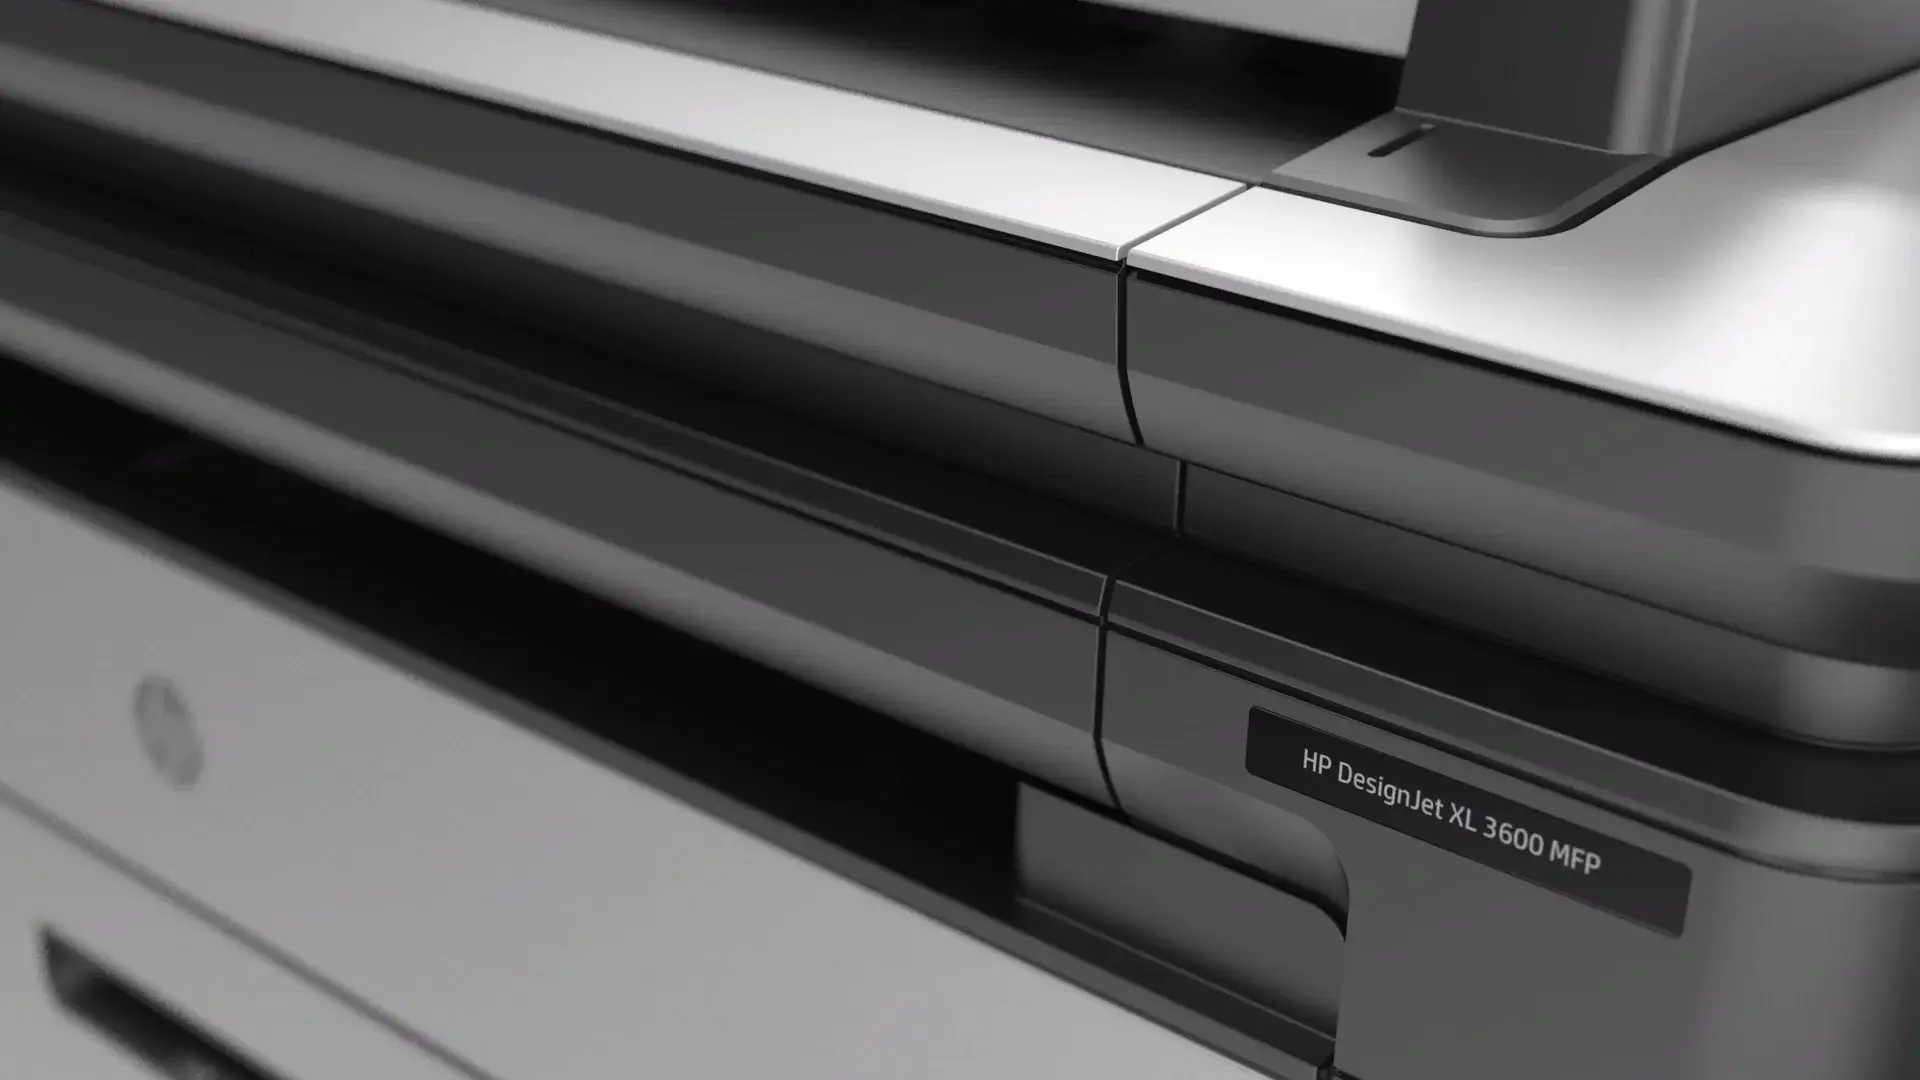 industrial design of a printer for HP by Nacar Design